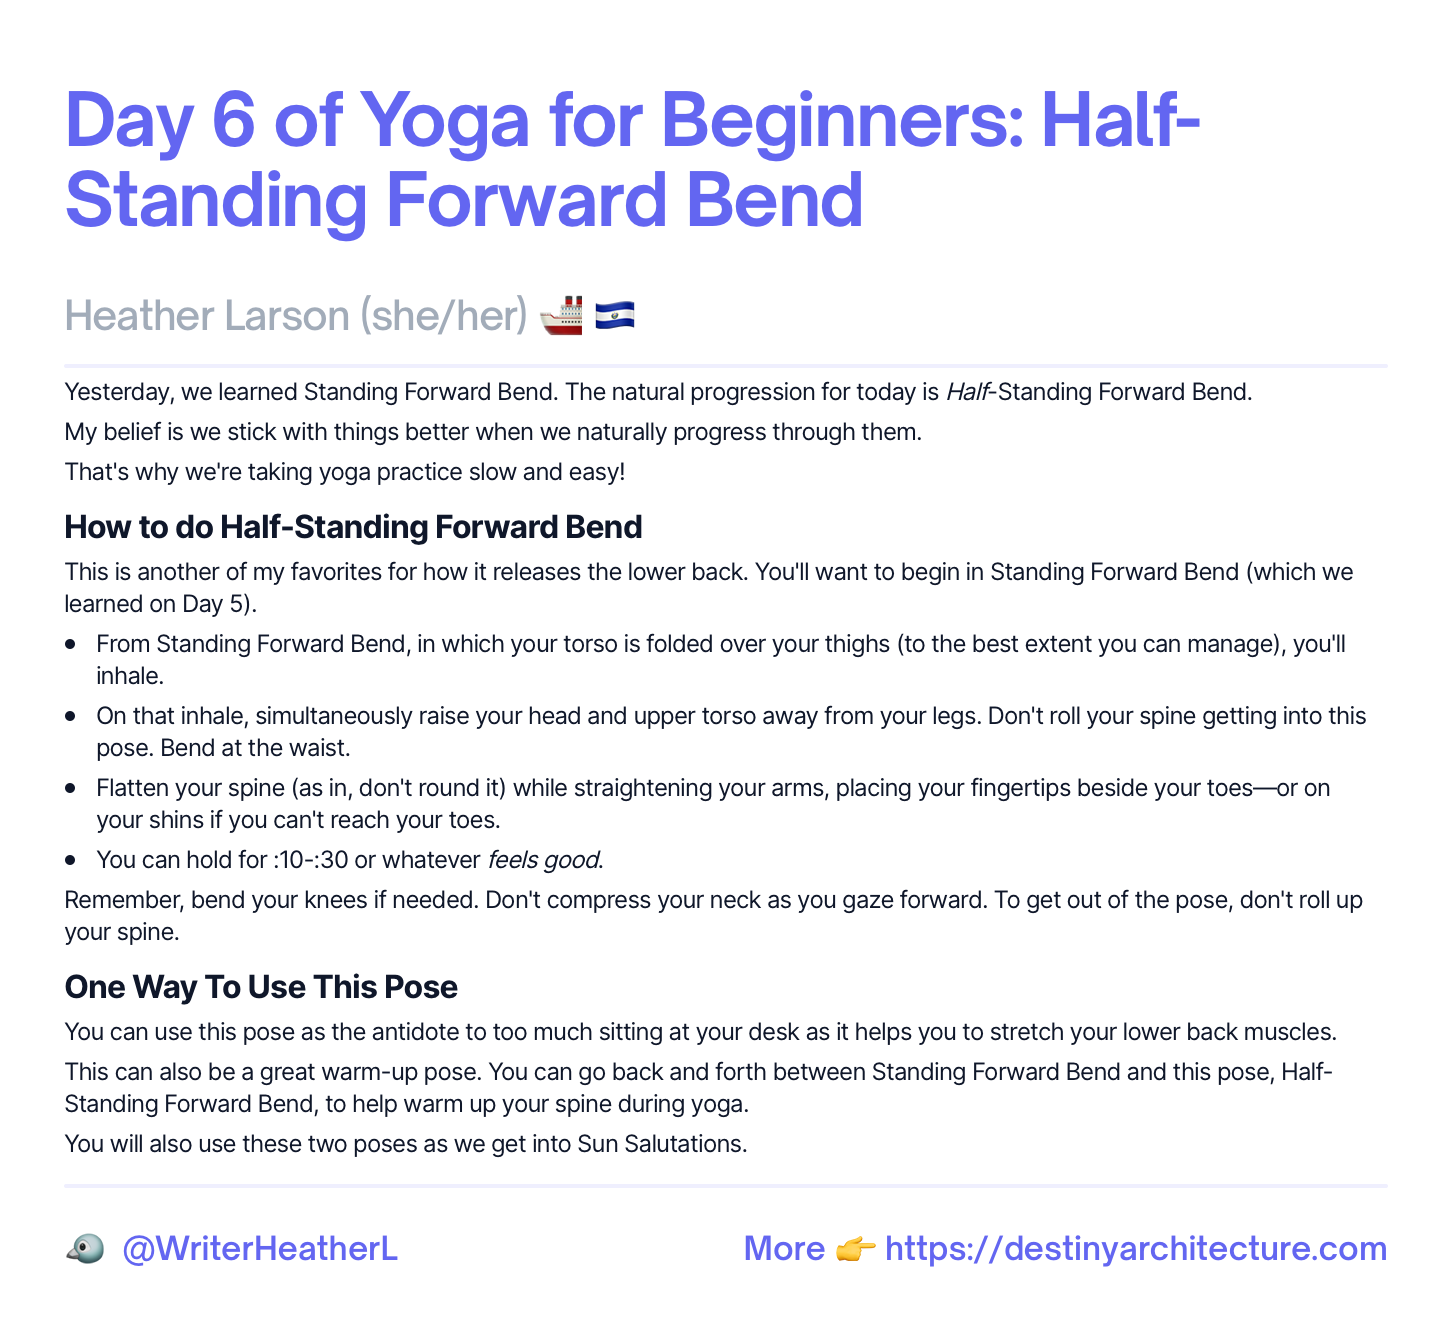 Day 6 of Yoga For Beginners: Half-Standing Forward Bend